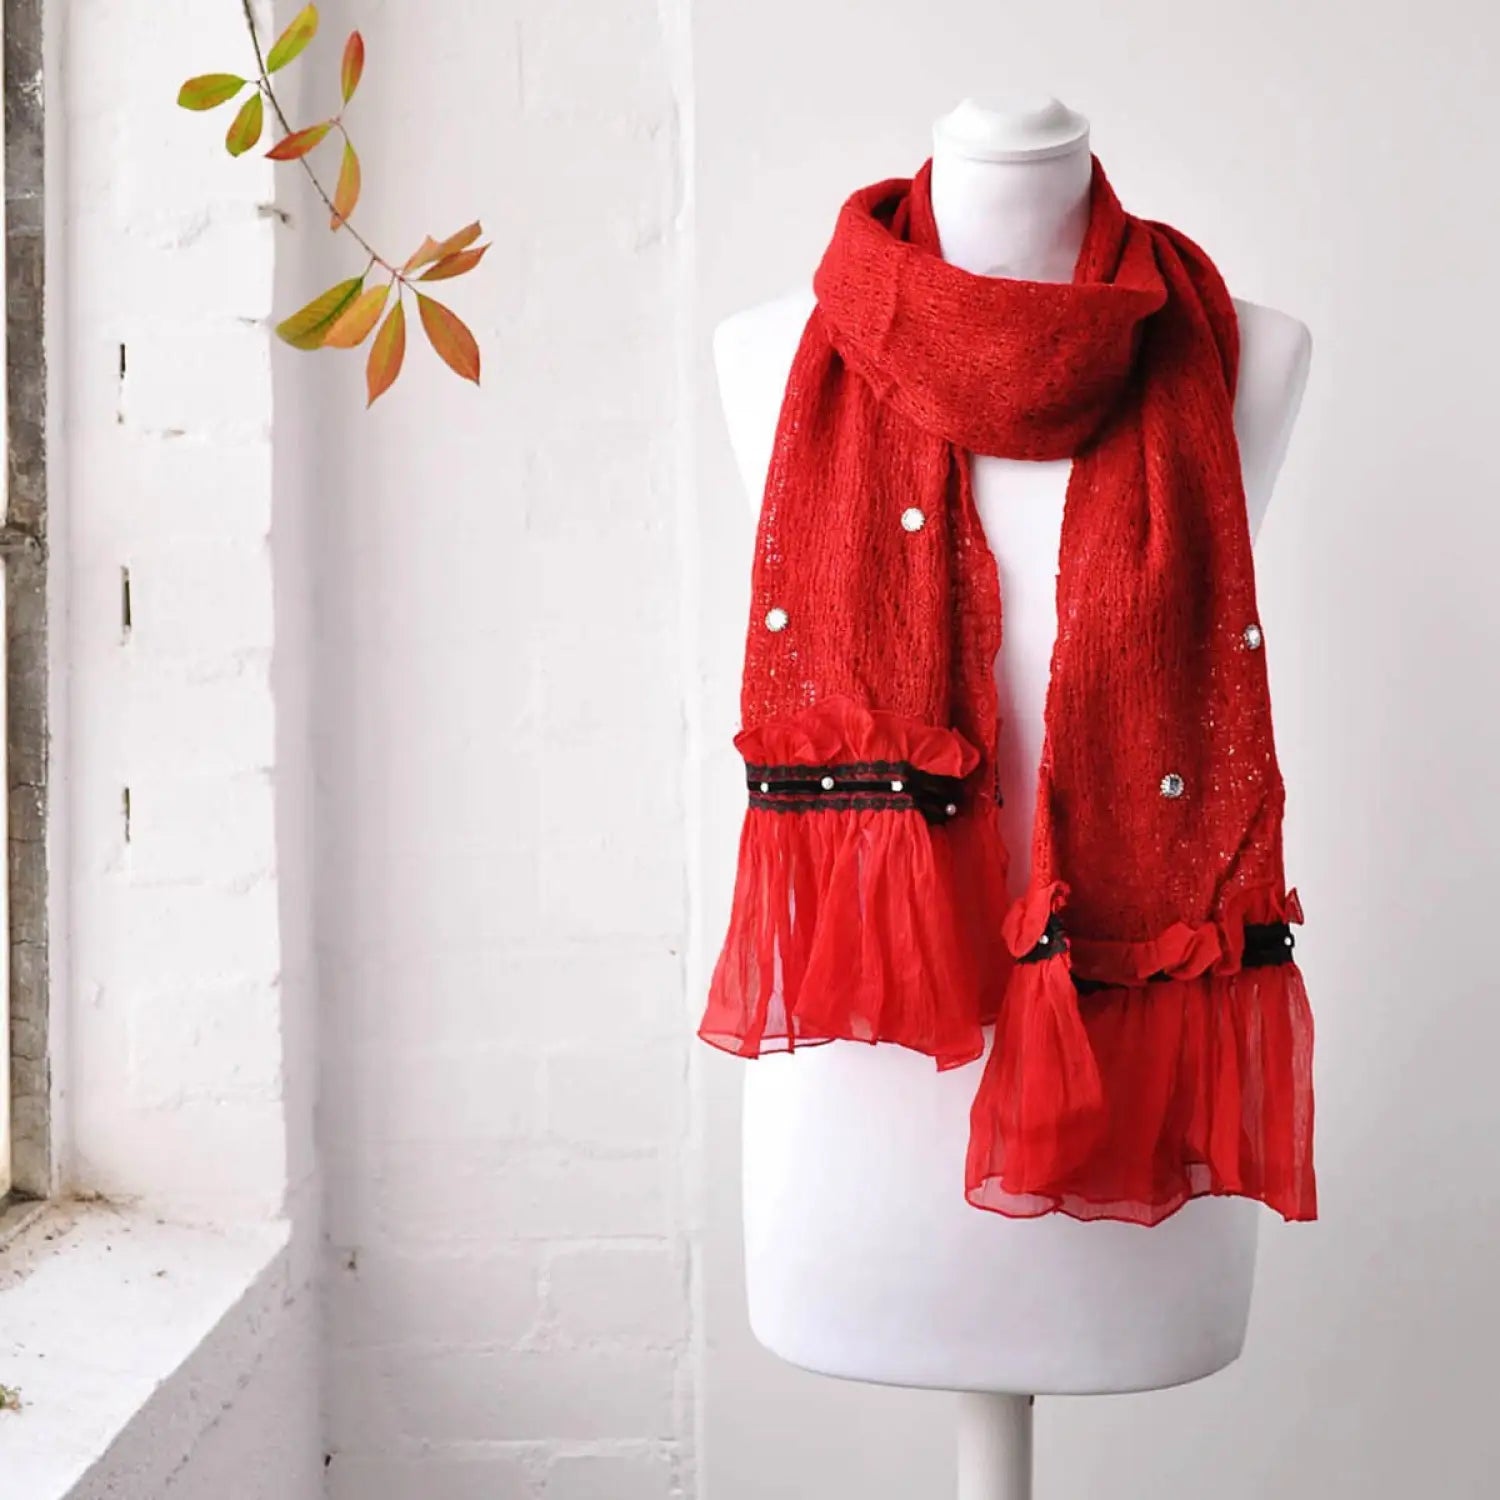 Bohemian retro ruffle red scarf displayed on mannequin